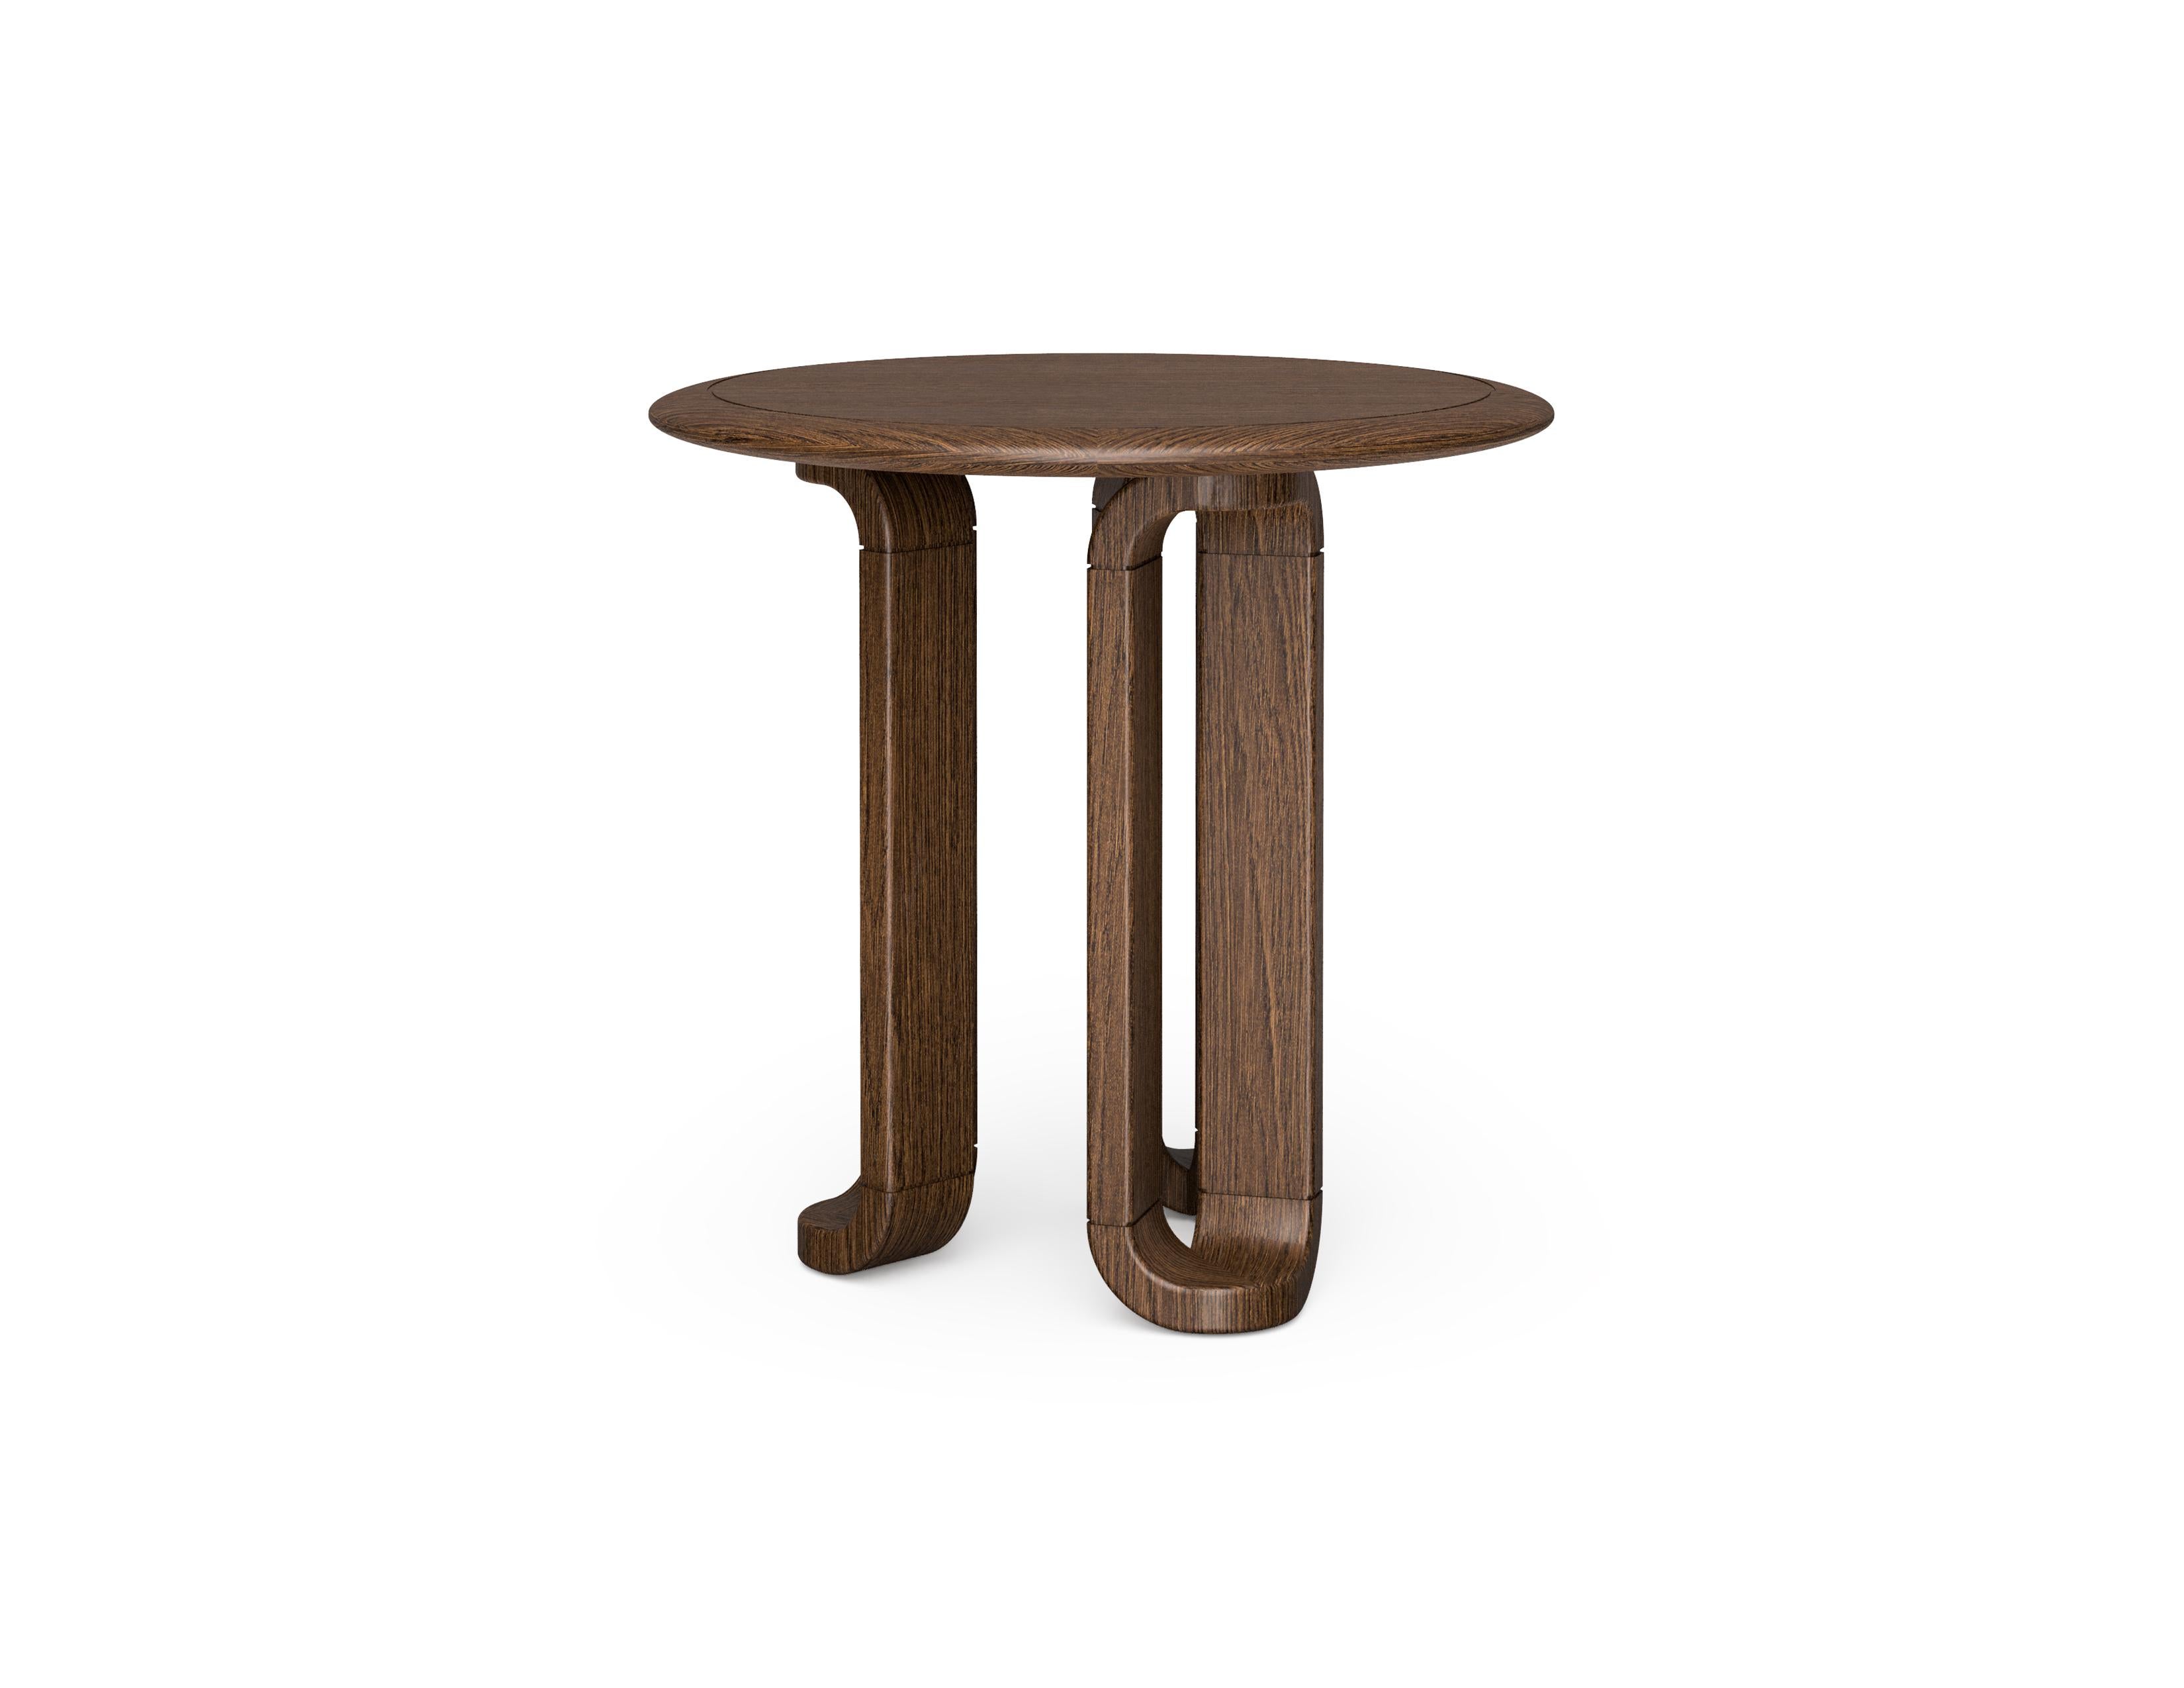 Oak Side Table, Round, Walnut with Antique Plated Metal Details For Sale